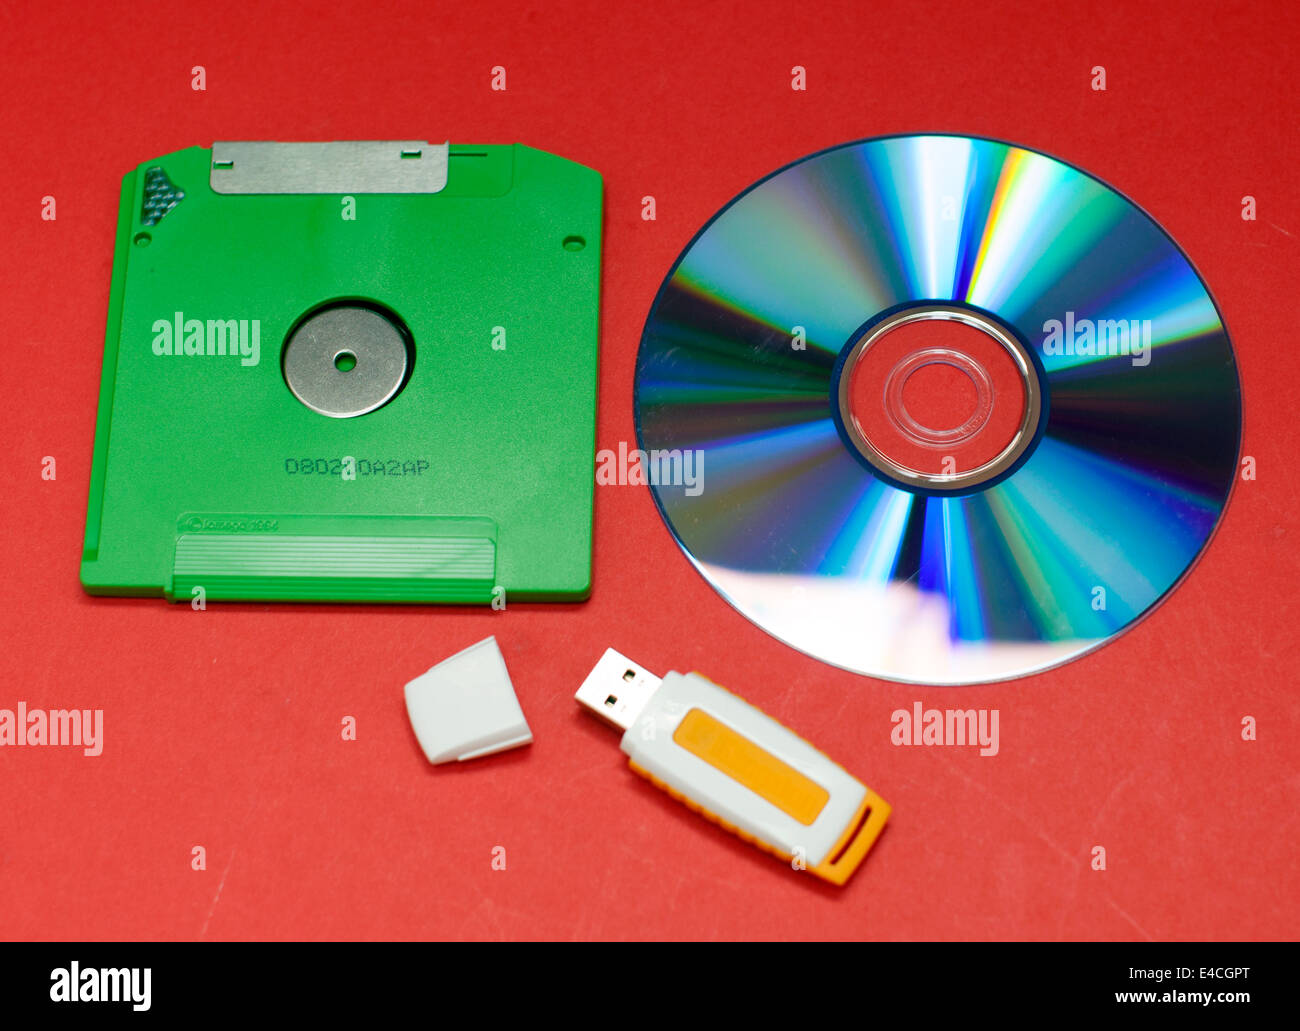 3 generations of data storage: floppy disk, DVD and USB stick Stock Photo